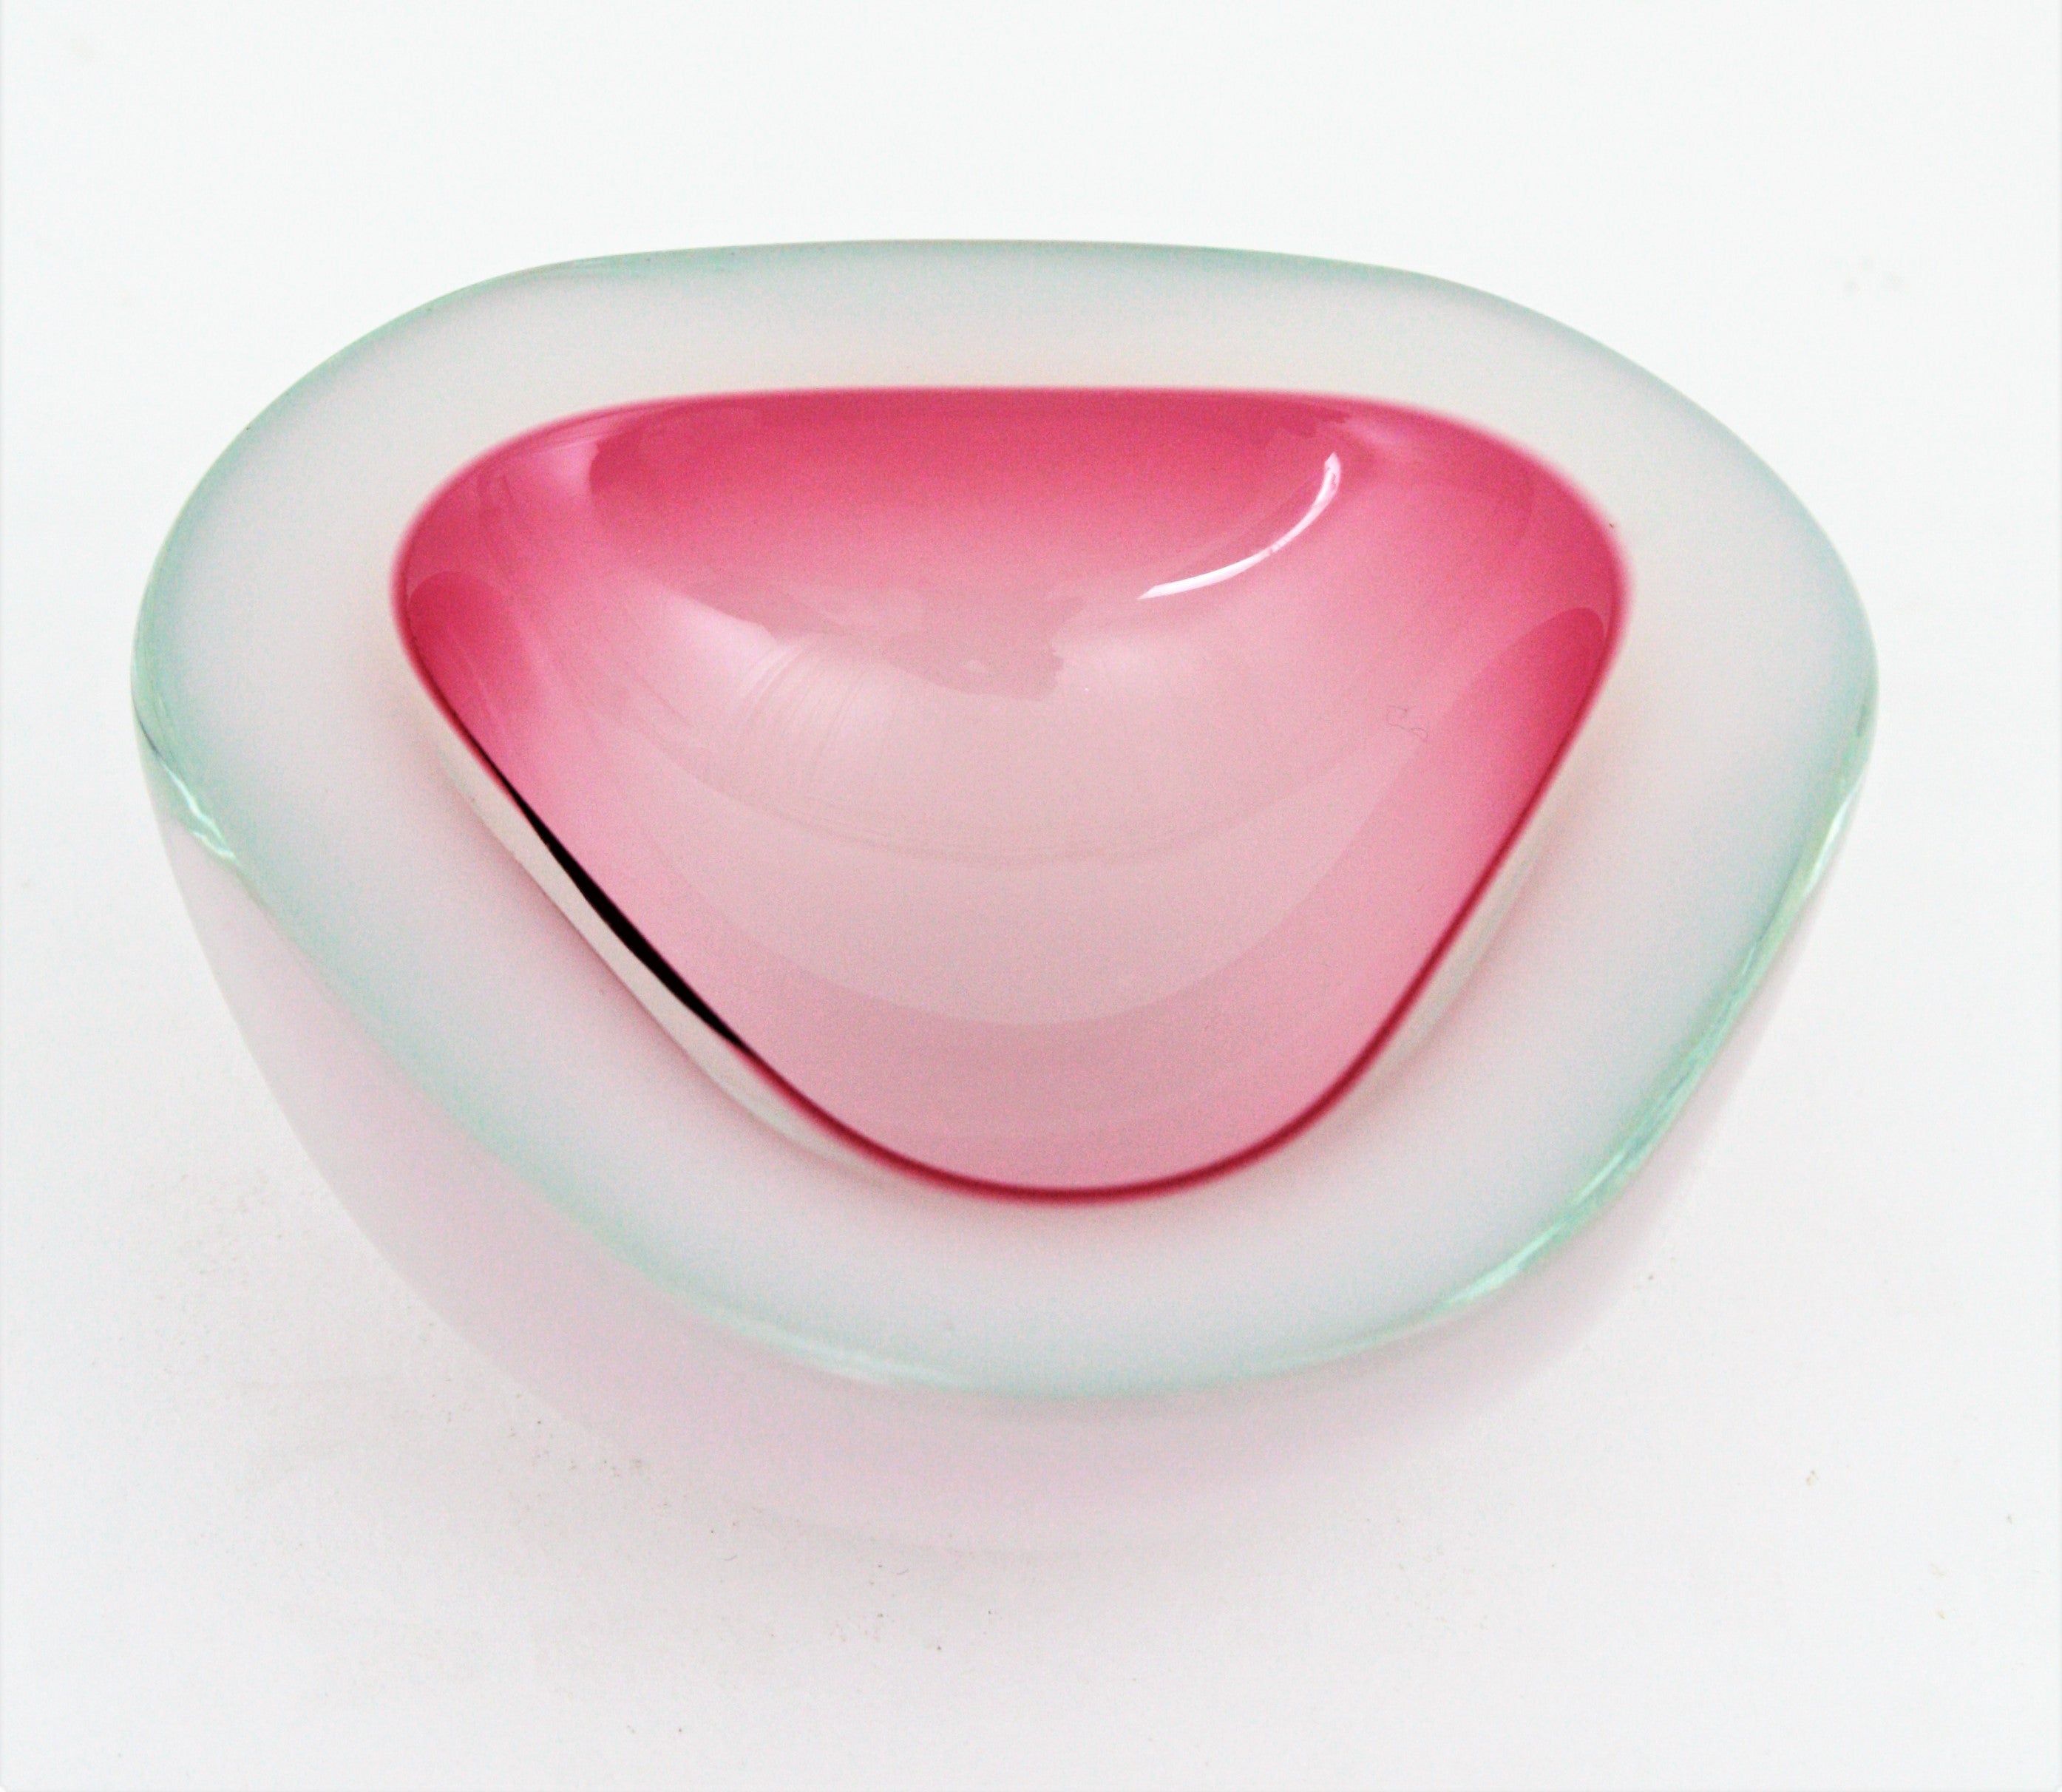 Hand blown Sommerso Murano glass opalescent pink and white large geode bowl. Attributed to Archimede Seguso, Italy, 1950s.
Alabastro pink opal white glass cased into clear glass using the Sommerso technique.
Lovely to be used as jewelry bowl,